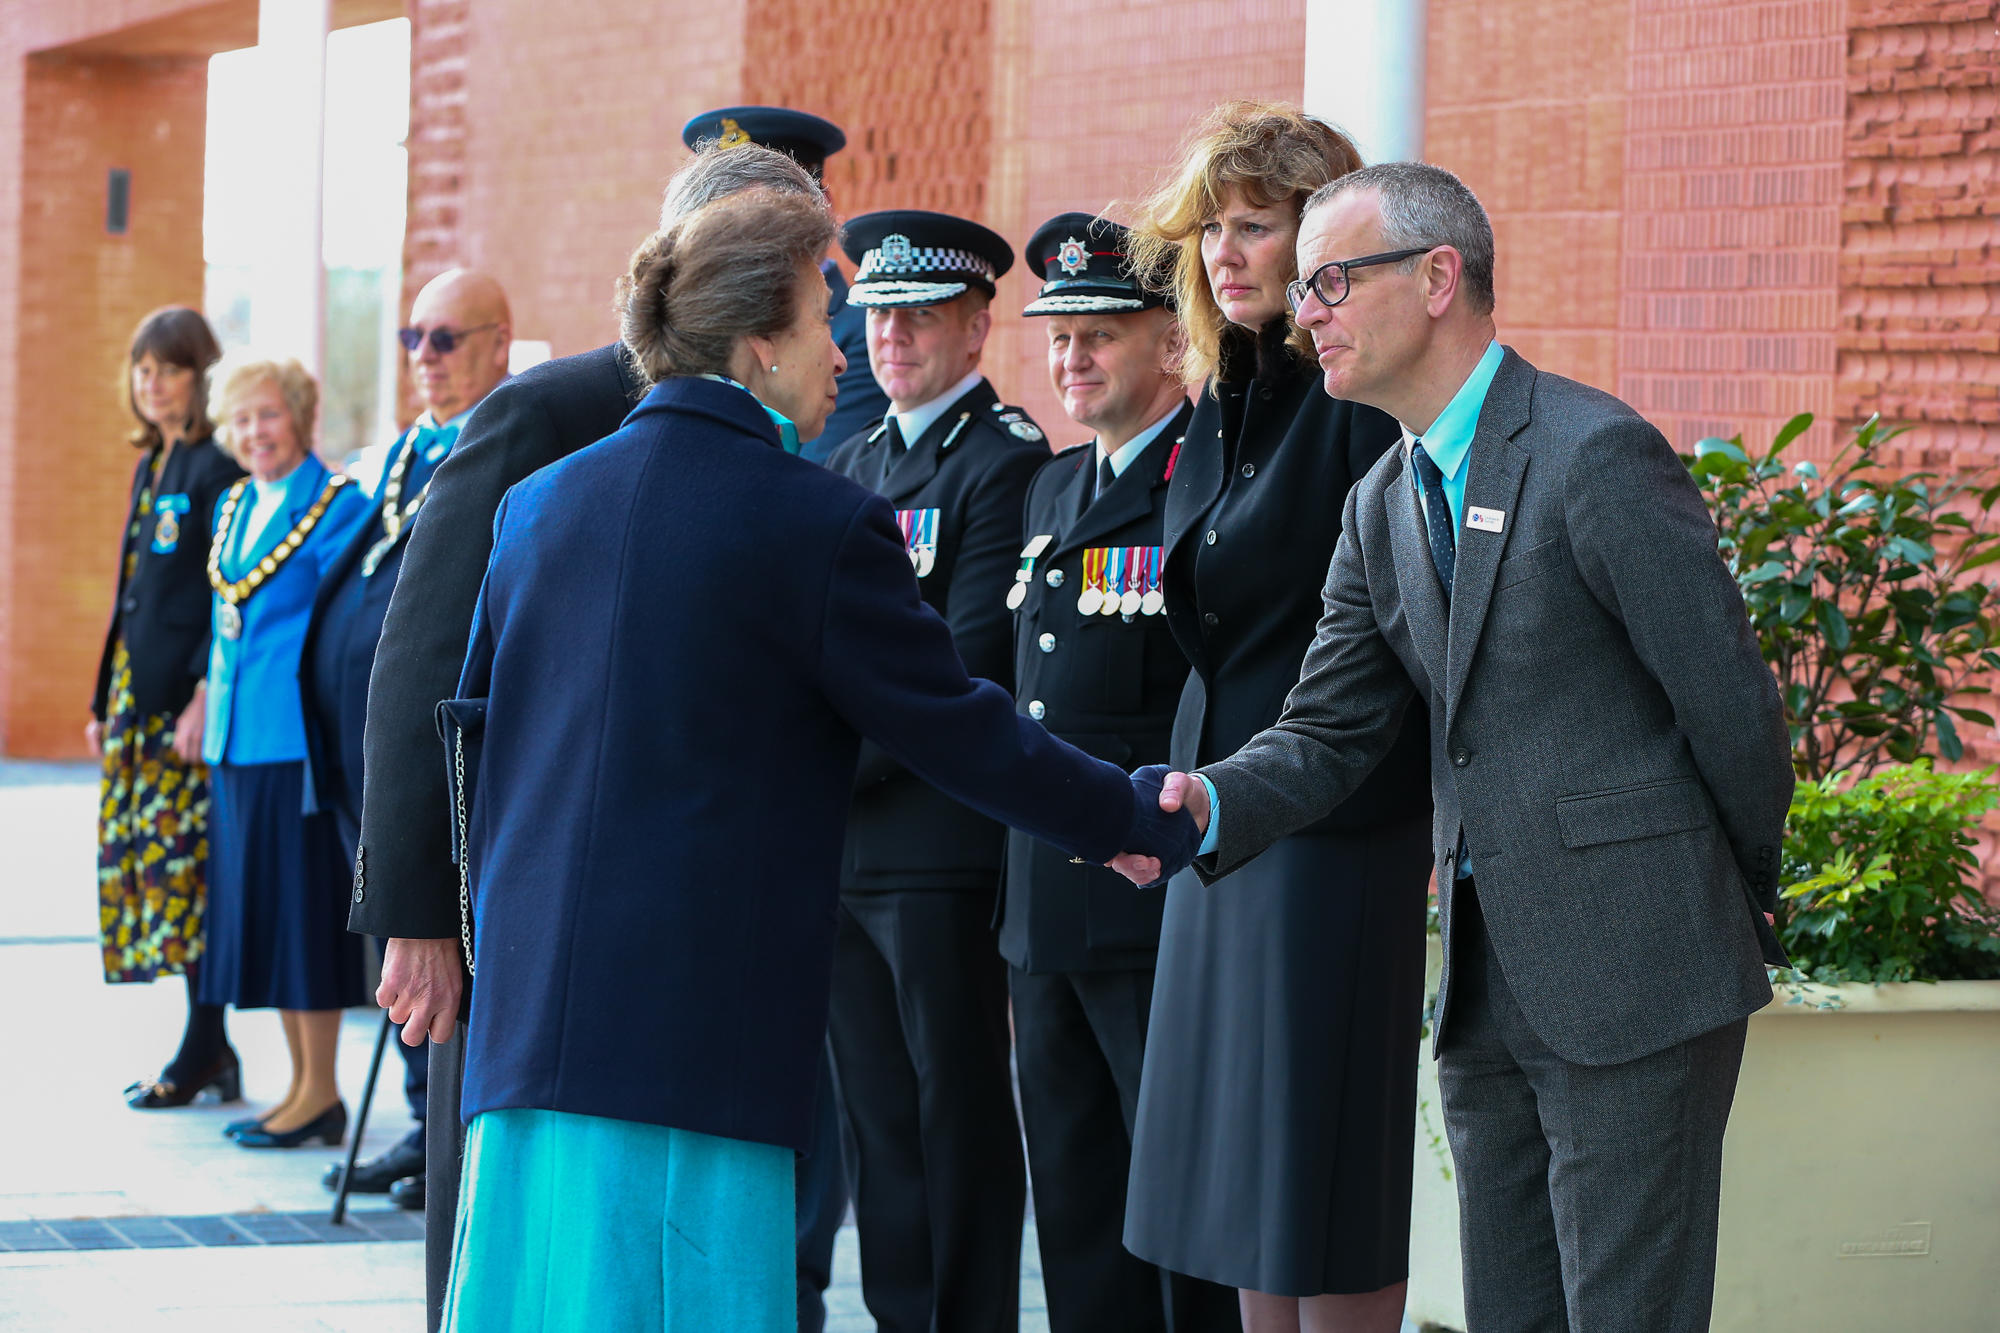 The Princess Royal was greeted by OS Chief Executive Nick Bolton